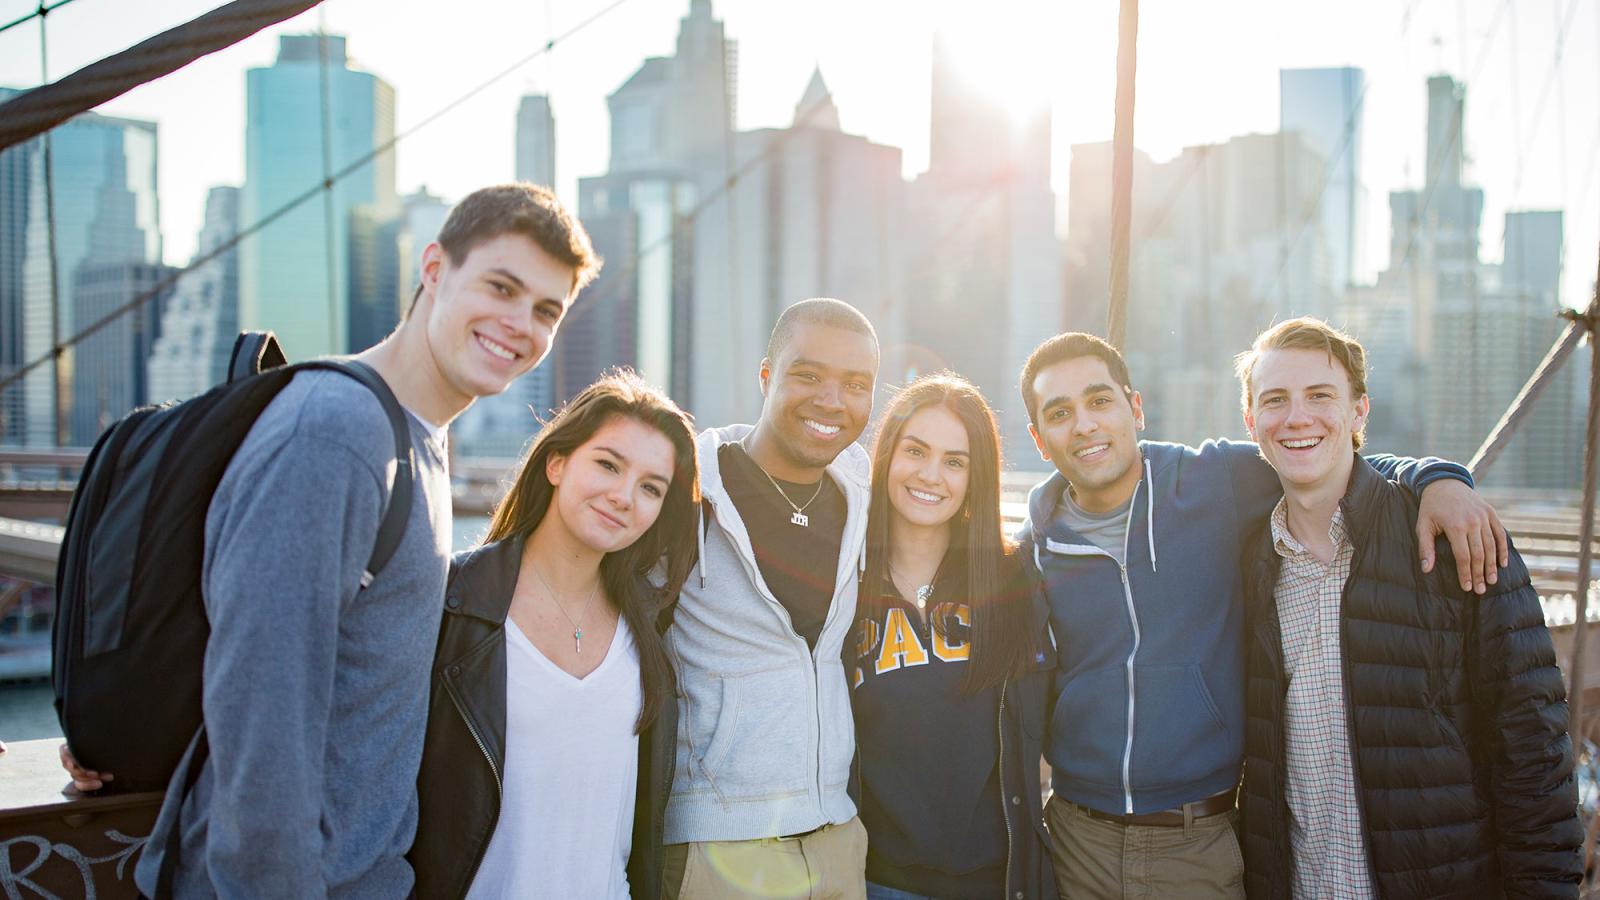 Students standing on the Brooklyn Bridge smiling at the camera.